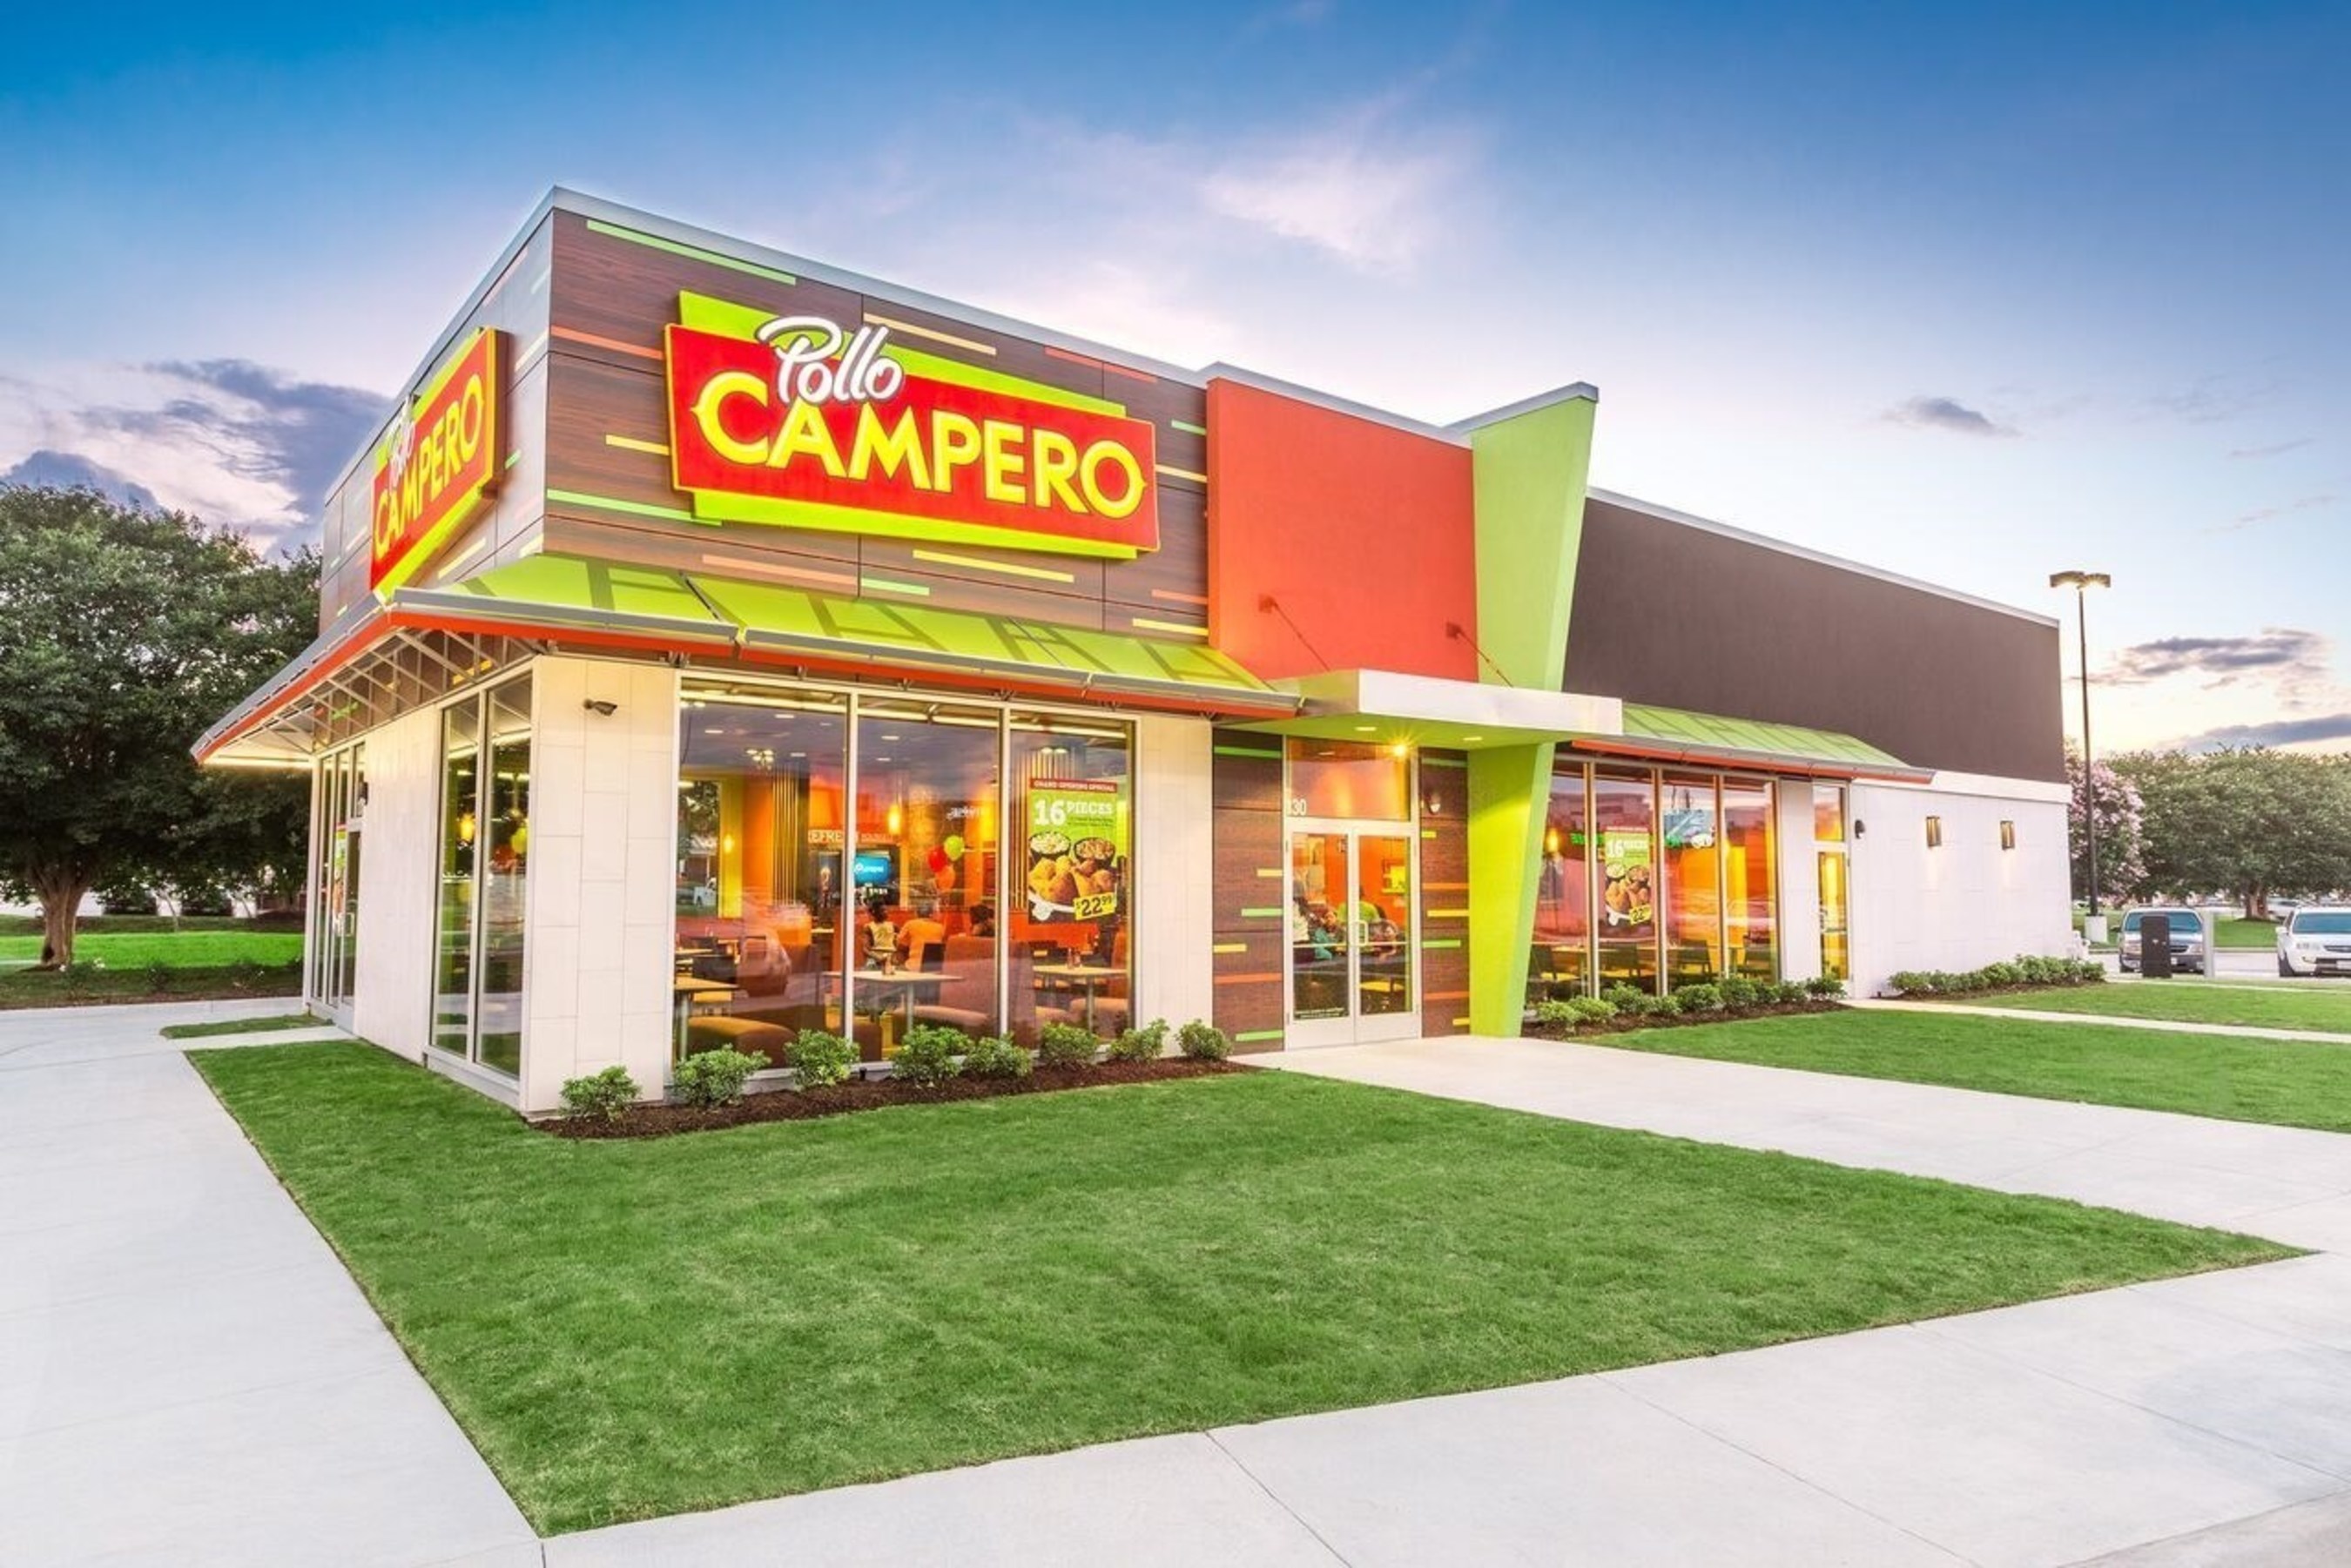 Pollo Campero's Comparable Sales Grow 9.1% for Second Quarter of 2016